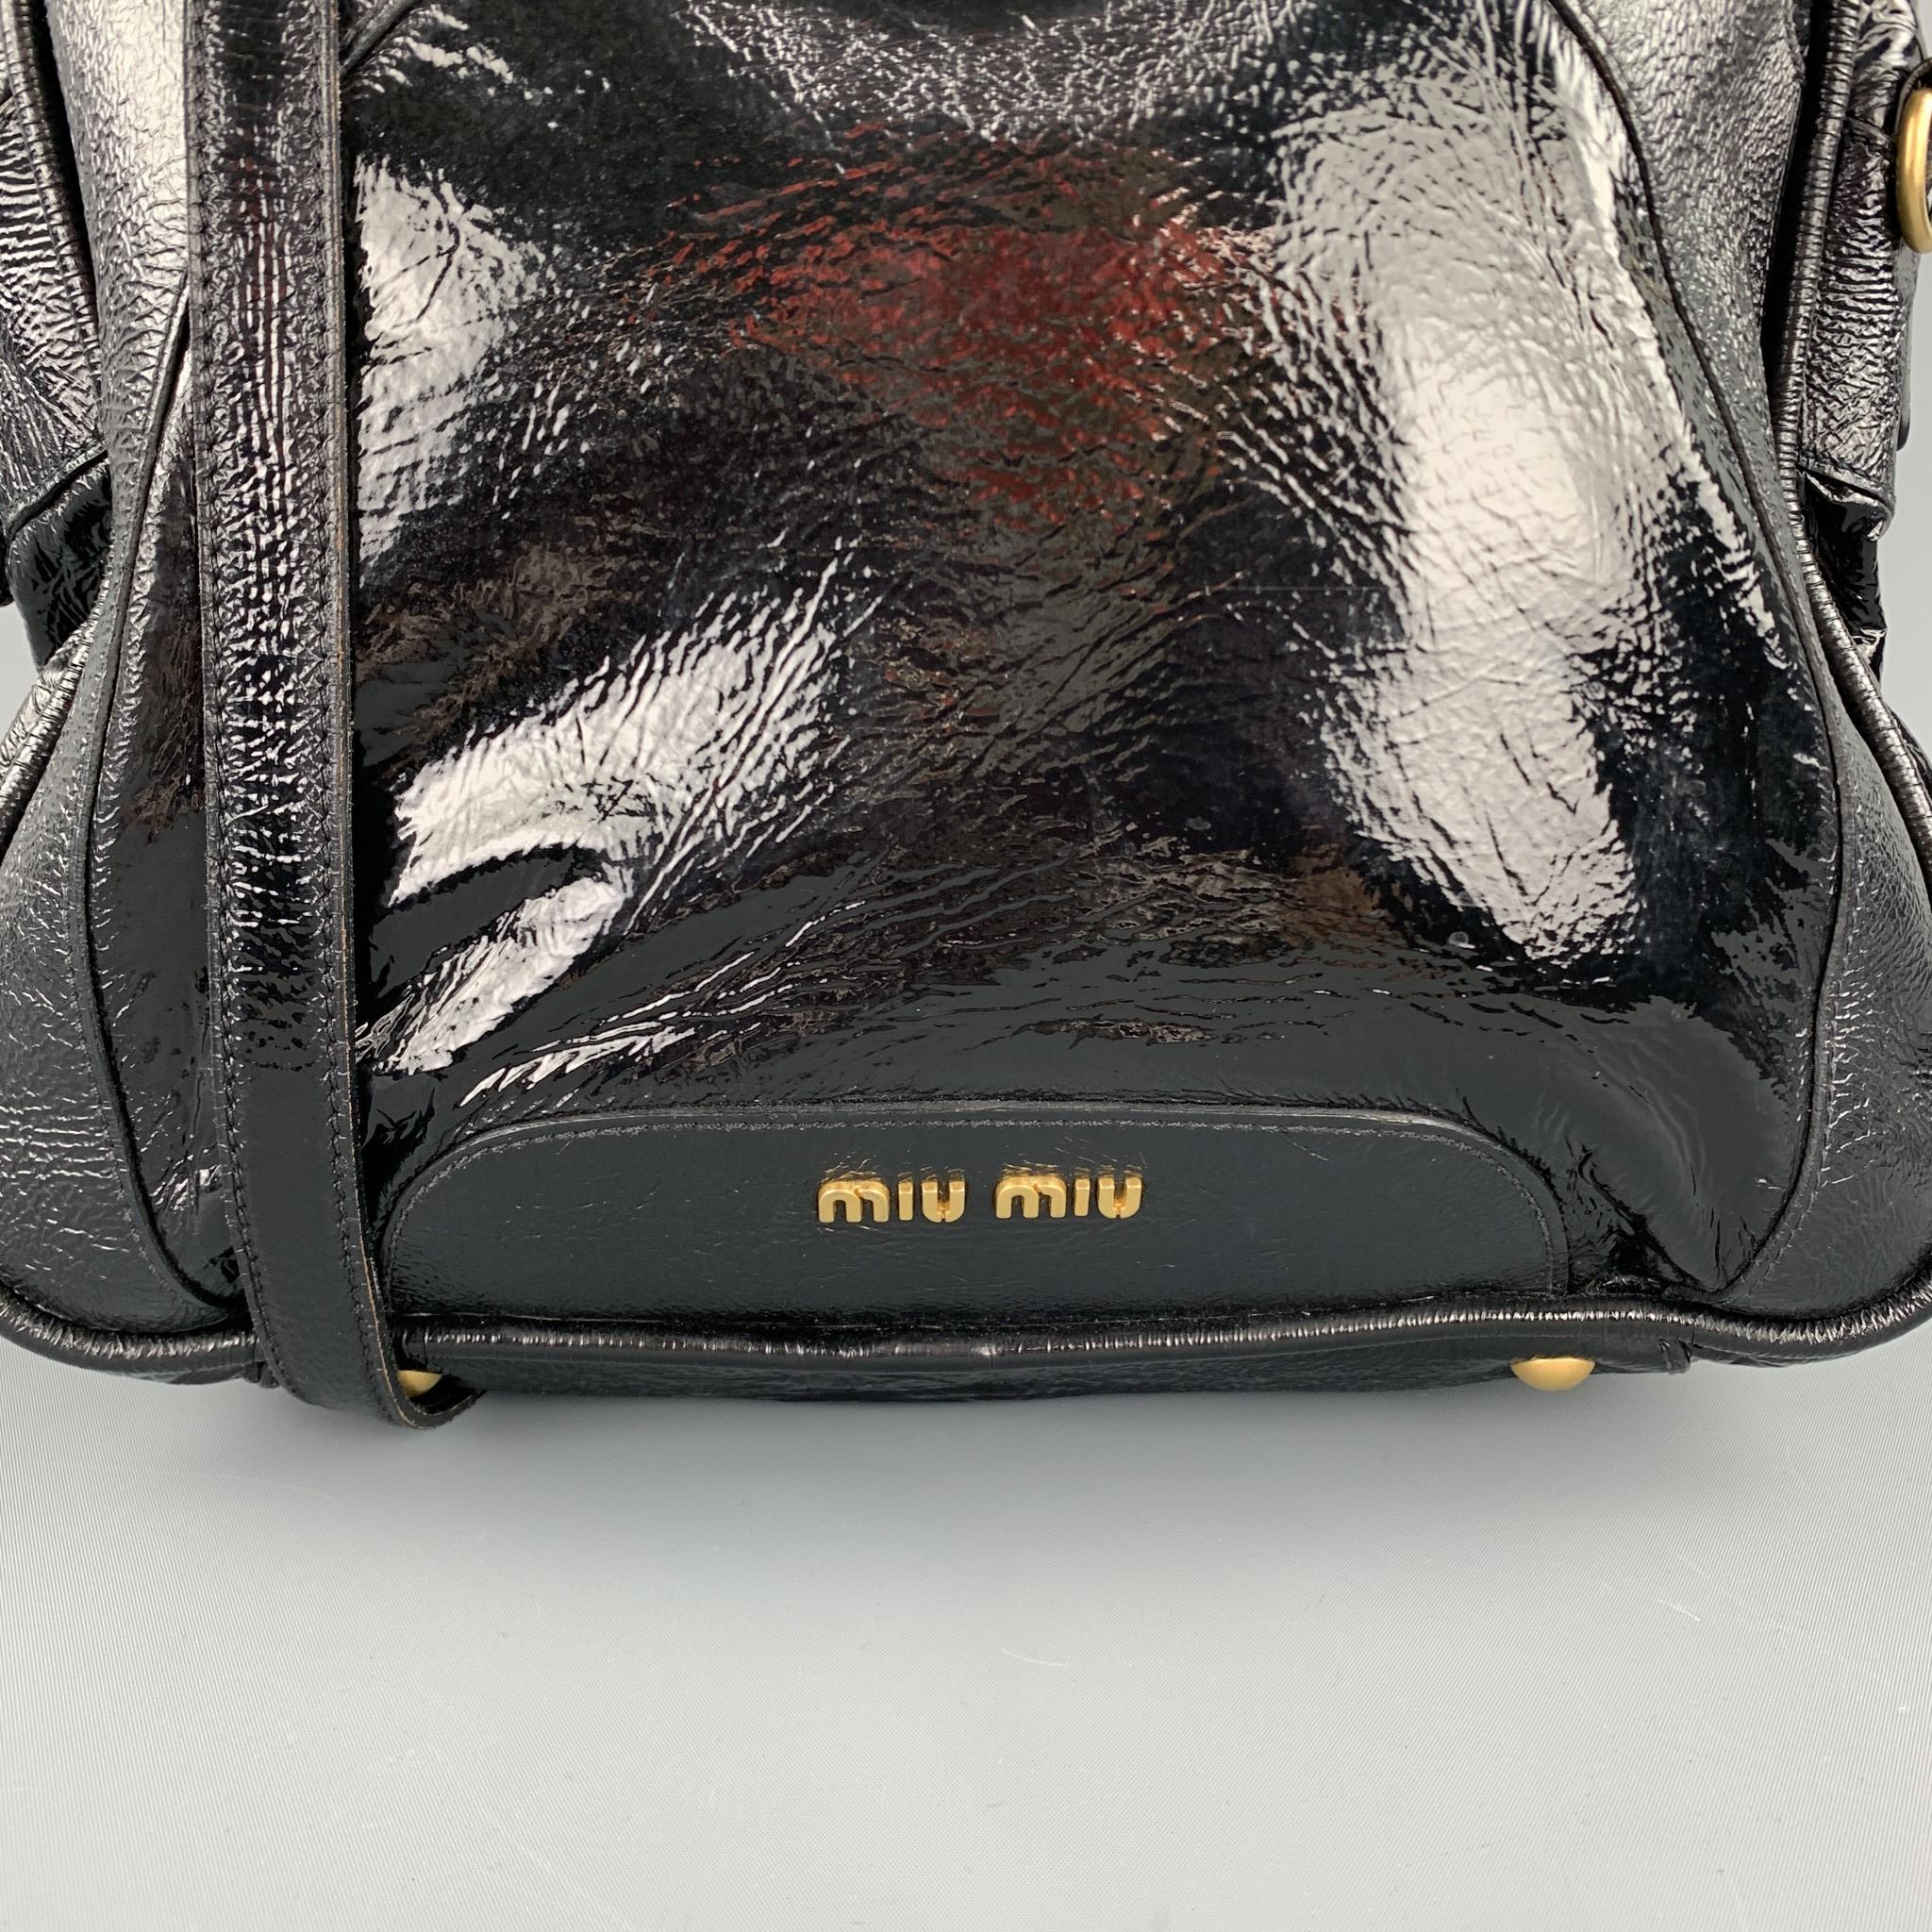 MIU MIU handbag comes in a black patent leather with gold toned hardware featuring a shoulder strap detail, top handles, inner zipper pocket, and a zip up closure. Made in Italy.

Good Pre-Owned Condition.

Measurements:

Length: 11 in.
Width: 13